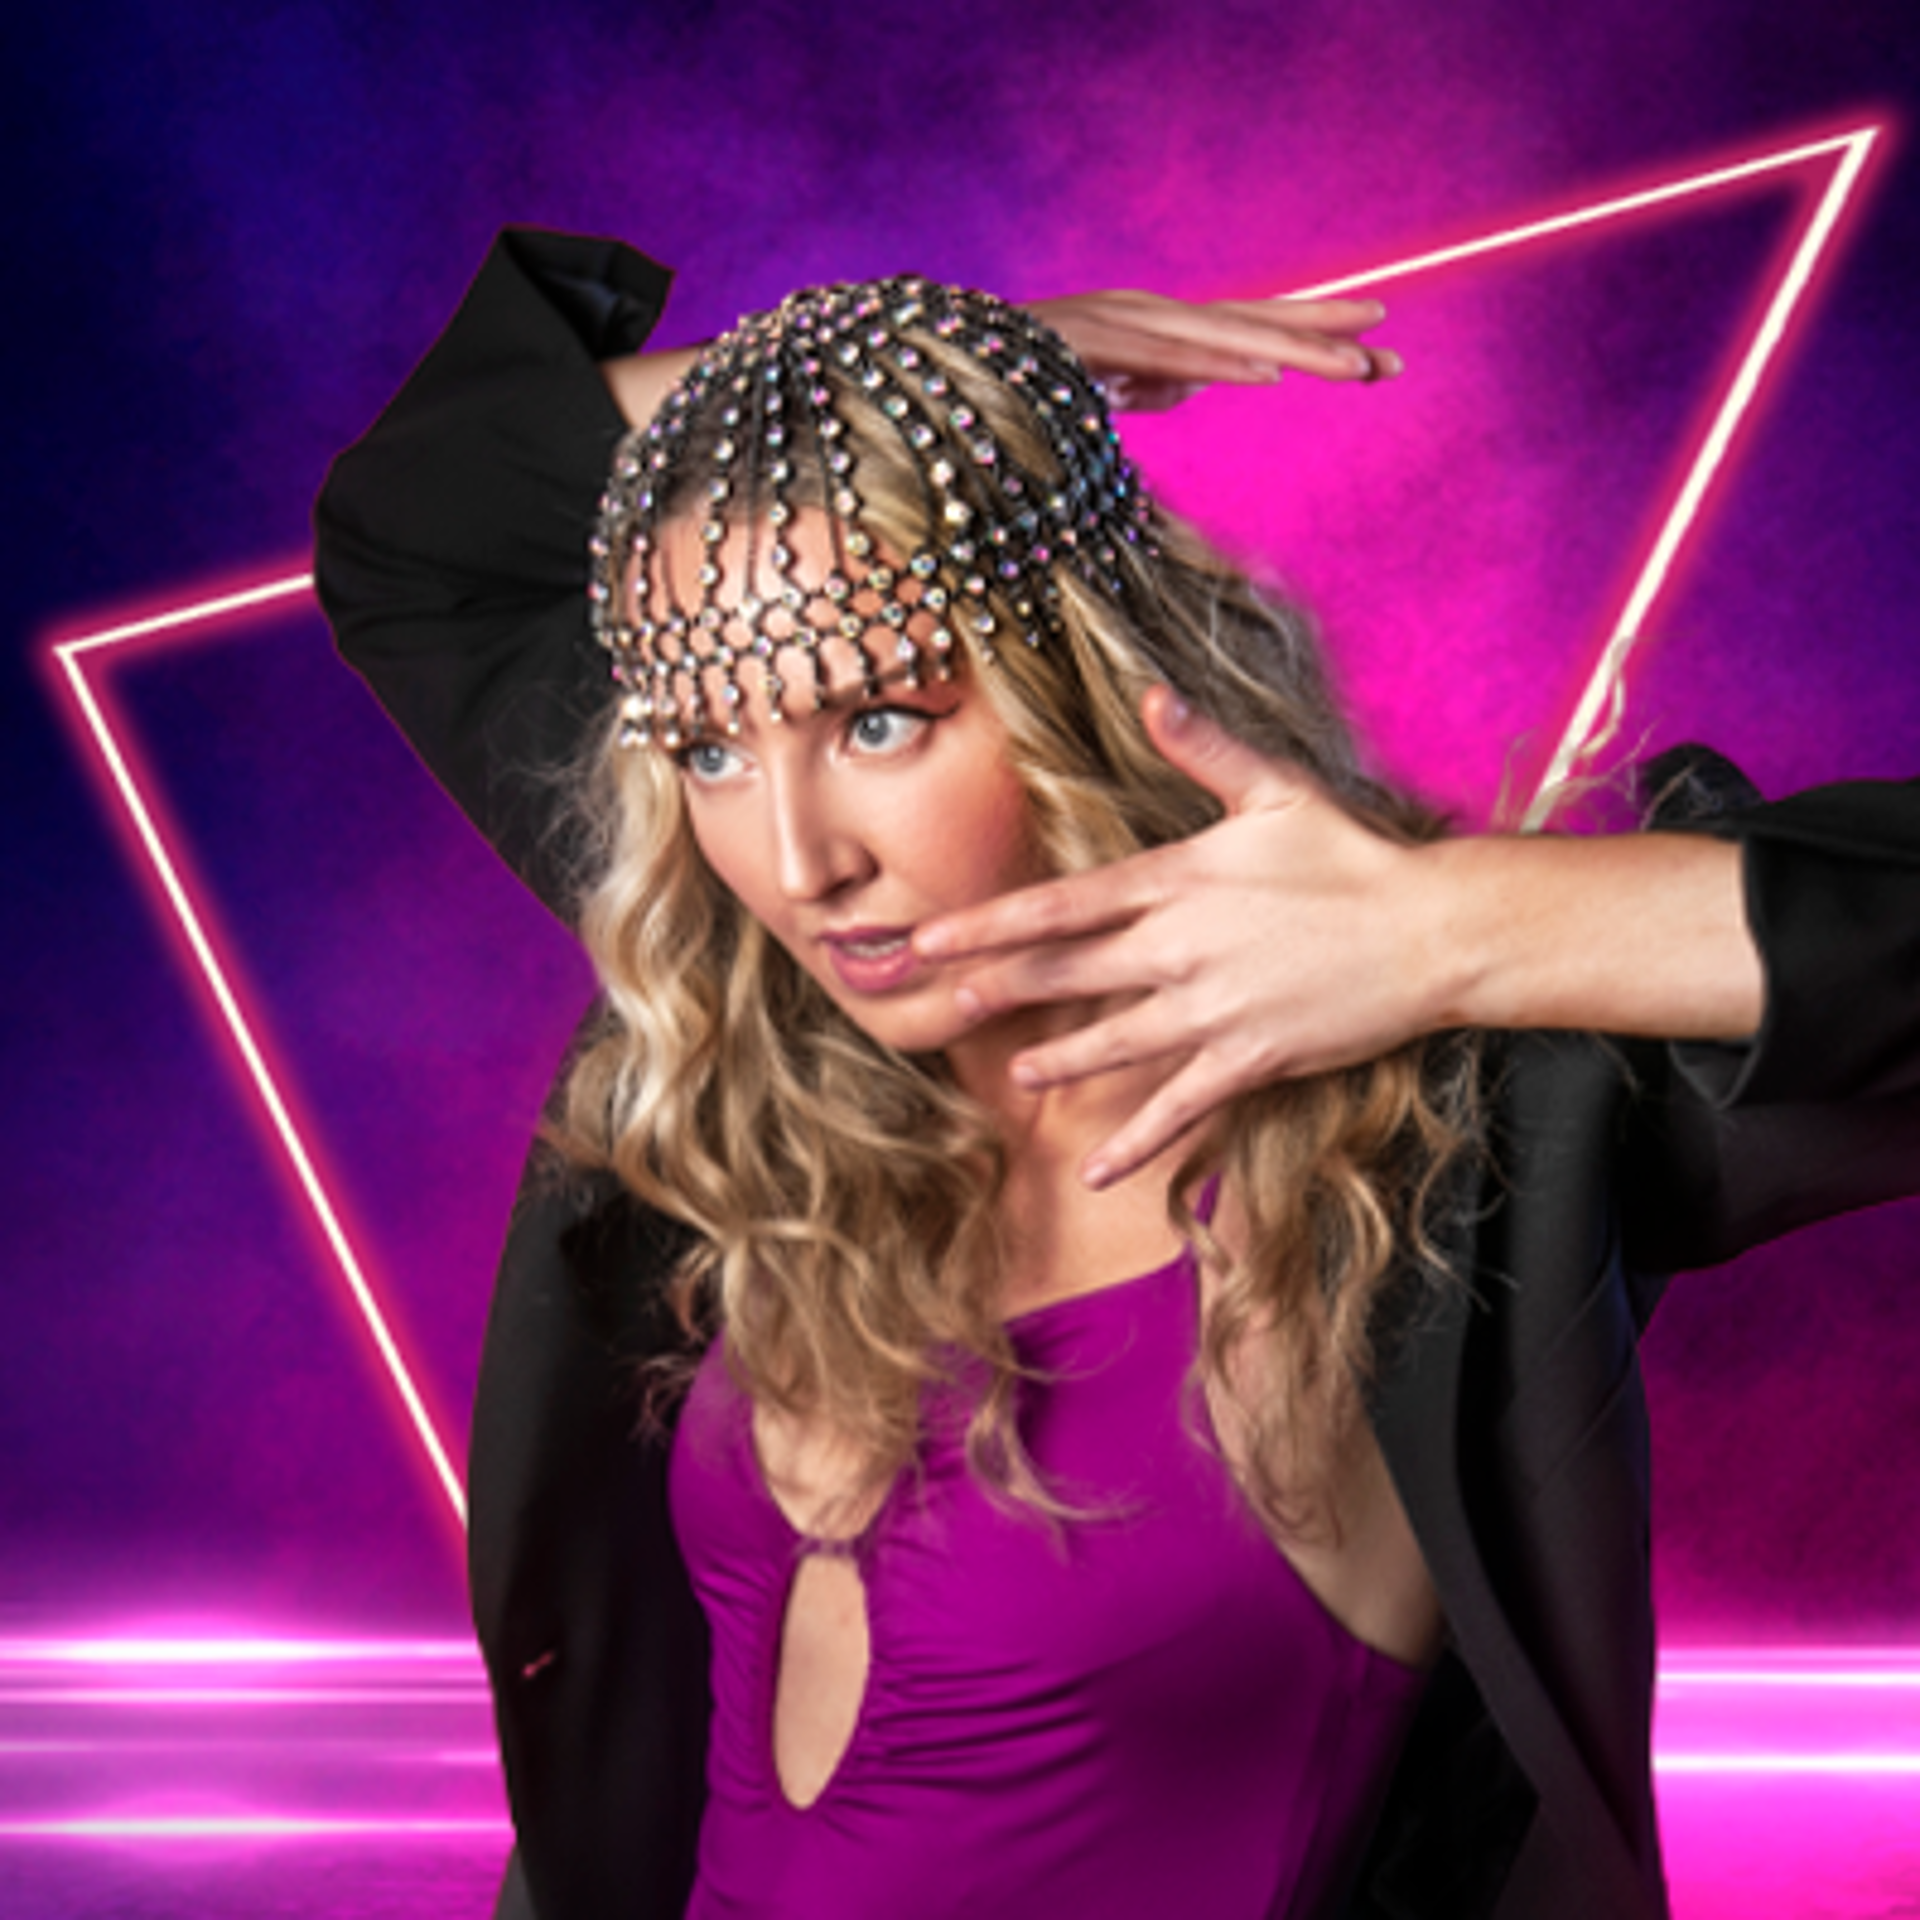 contemporary  dancer looking up to the top left of the image holding her face with one arm behind her head on hot pink background. White, long curly blonde haired female wearing black trousers, purple leotard, black blazer and a diamond head cap. 